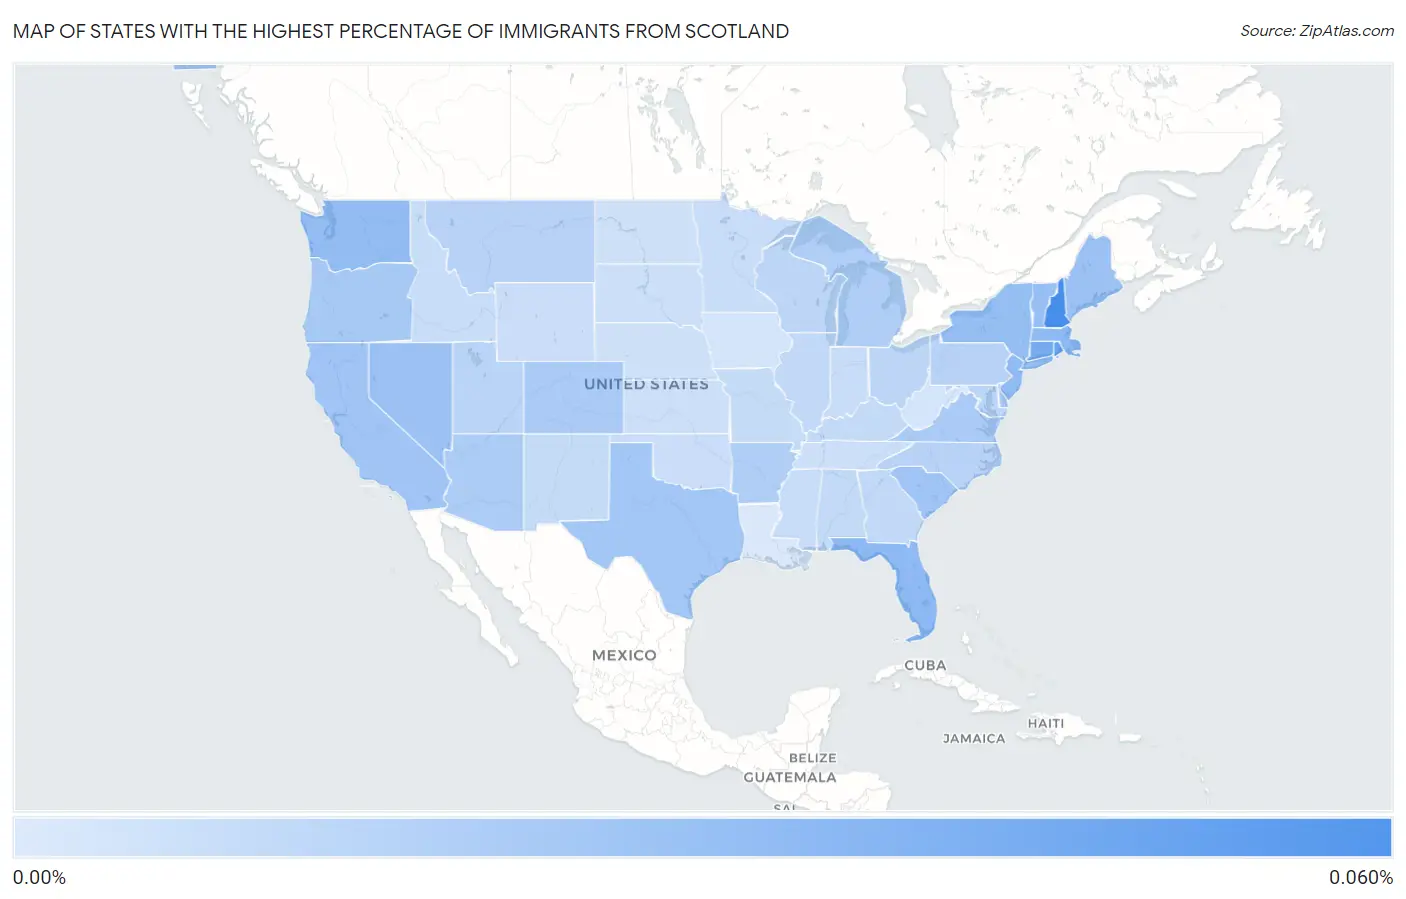 States with the Highest Percentage of Immigrants from Scotland in the United States Map